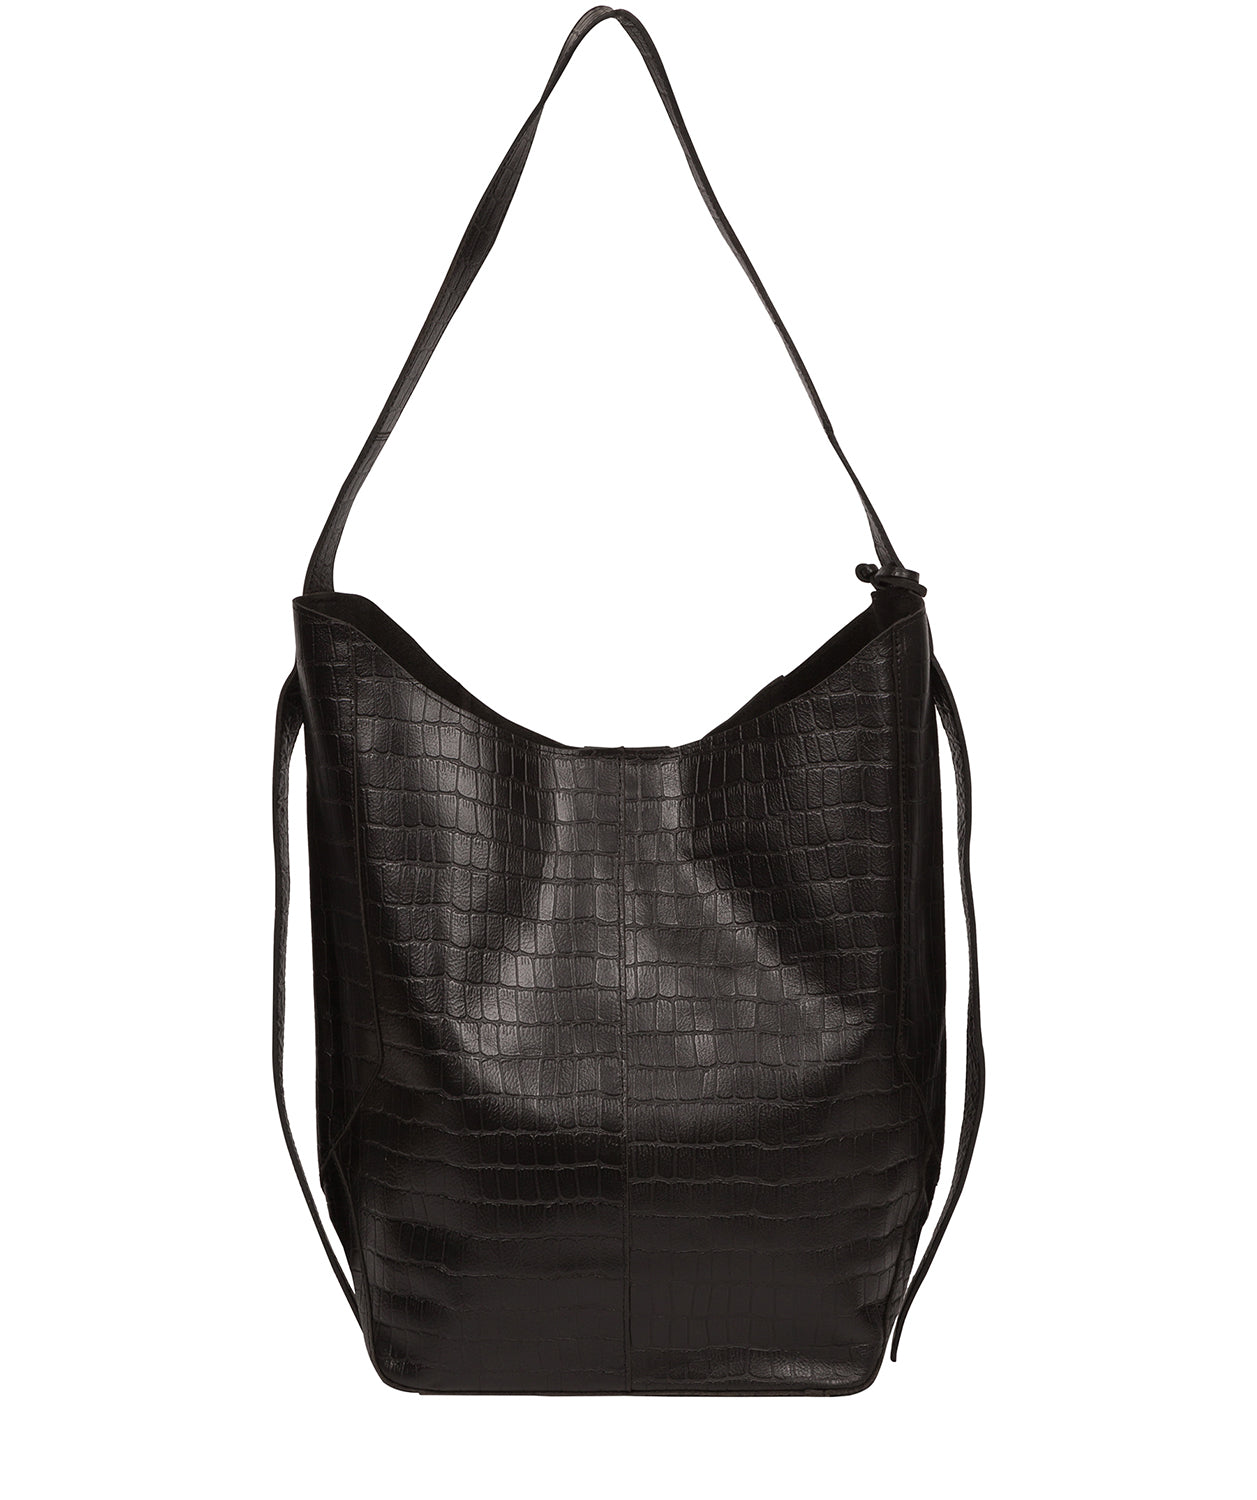 Black Leather Shoulder Bag 'Harrow' by Cultured London – Pure Luxuries ...